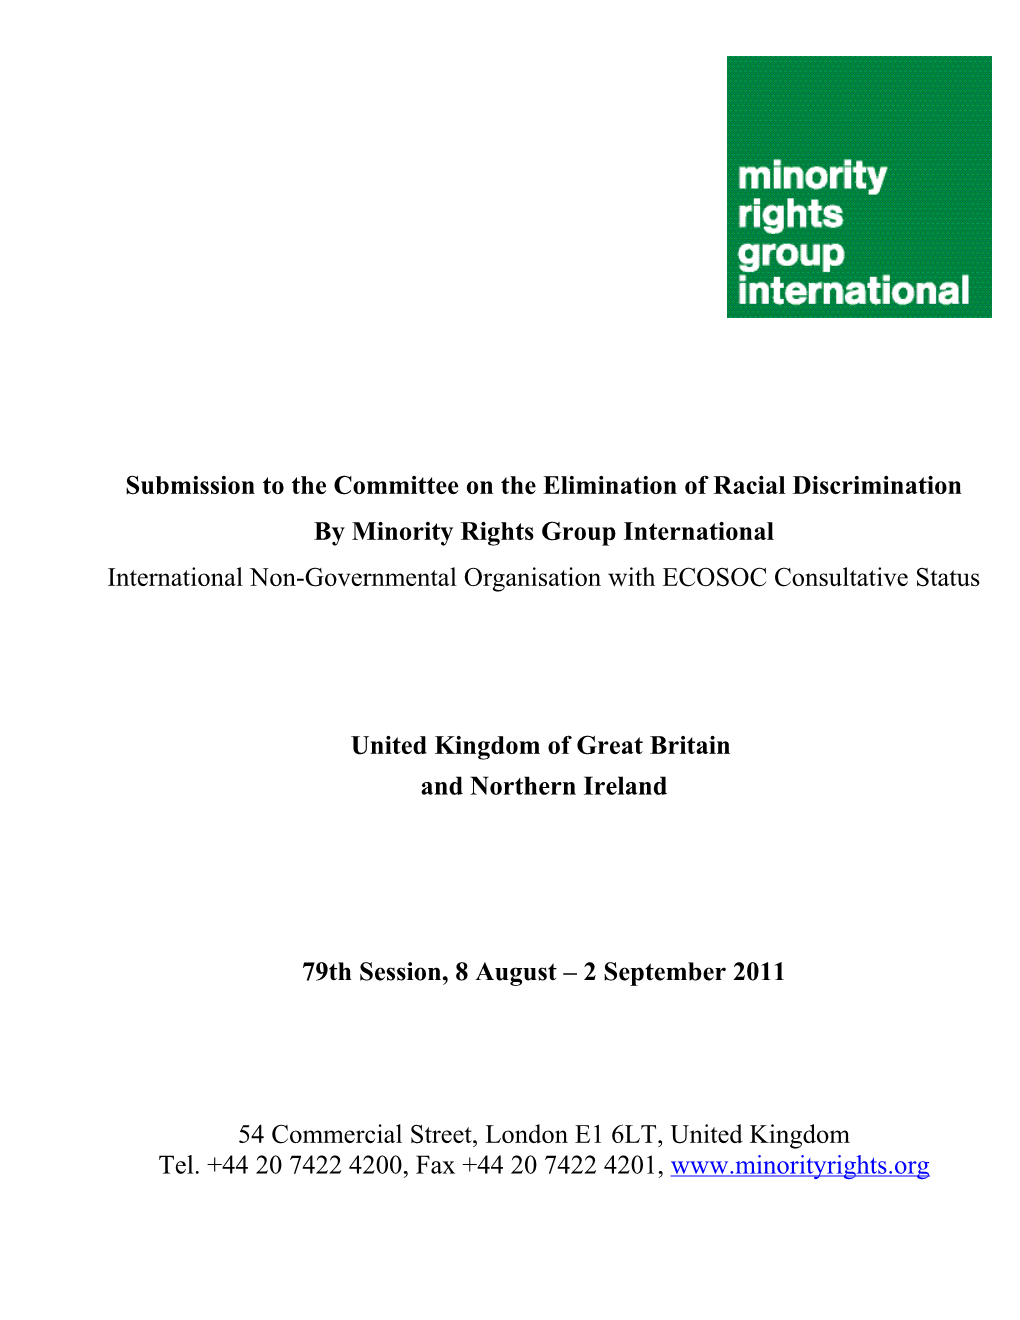 Submission to the Committee on the Elimination of Racial Discrimination